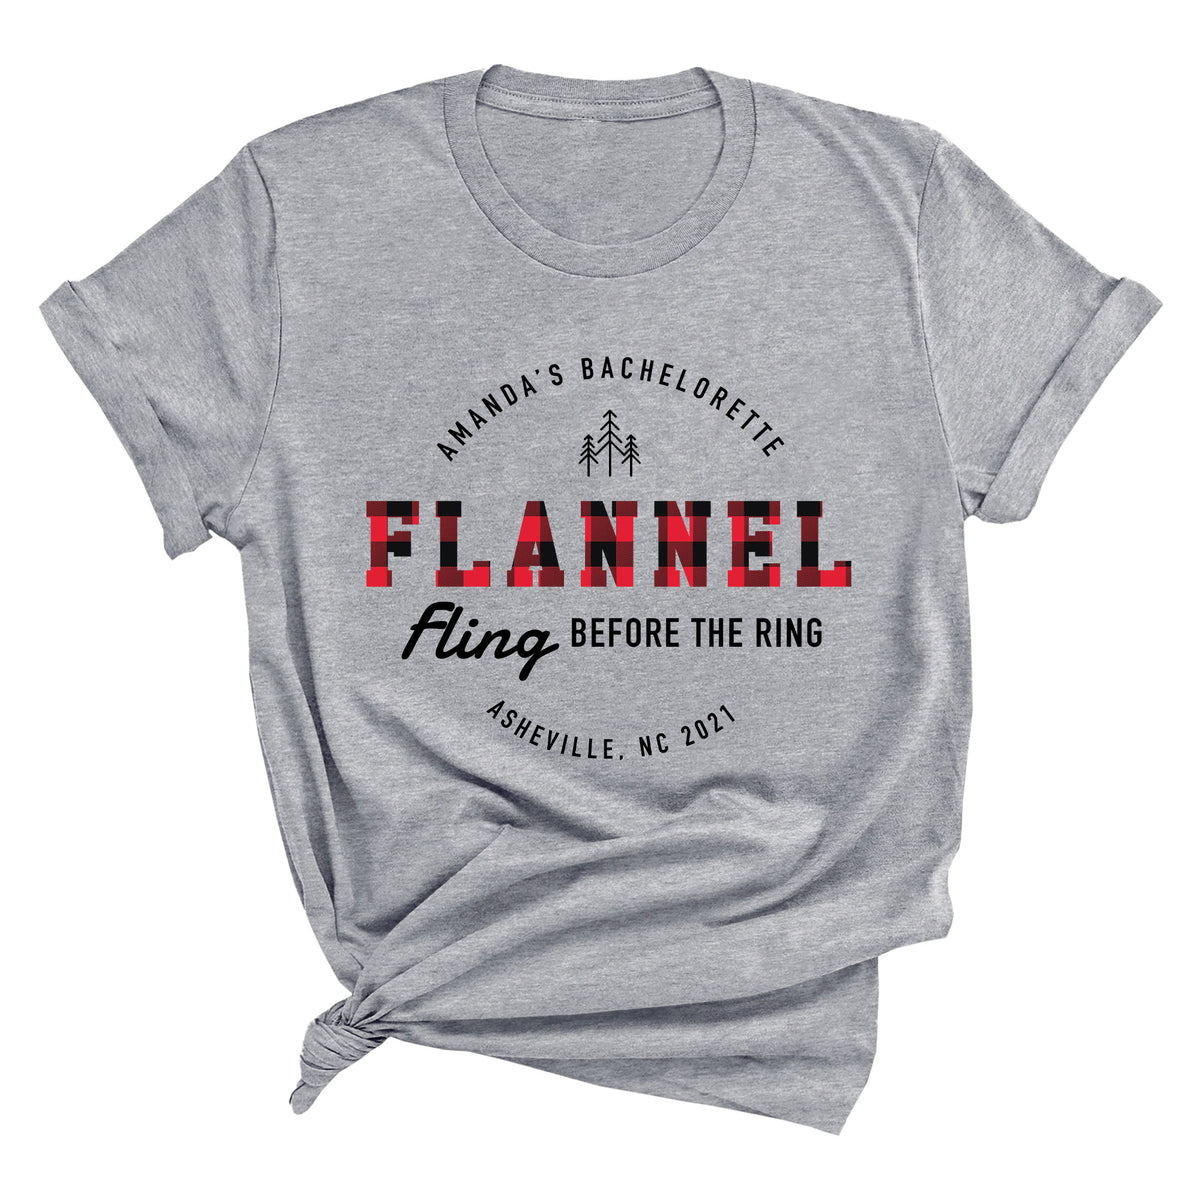 Flannel Fling Before the Ring with Custom Unisex T-Shirt